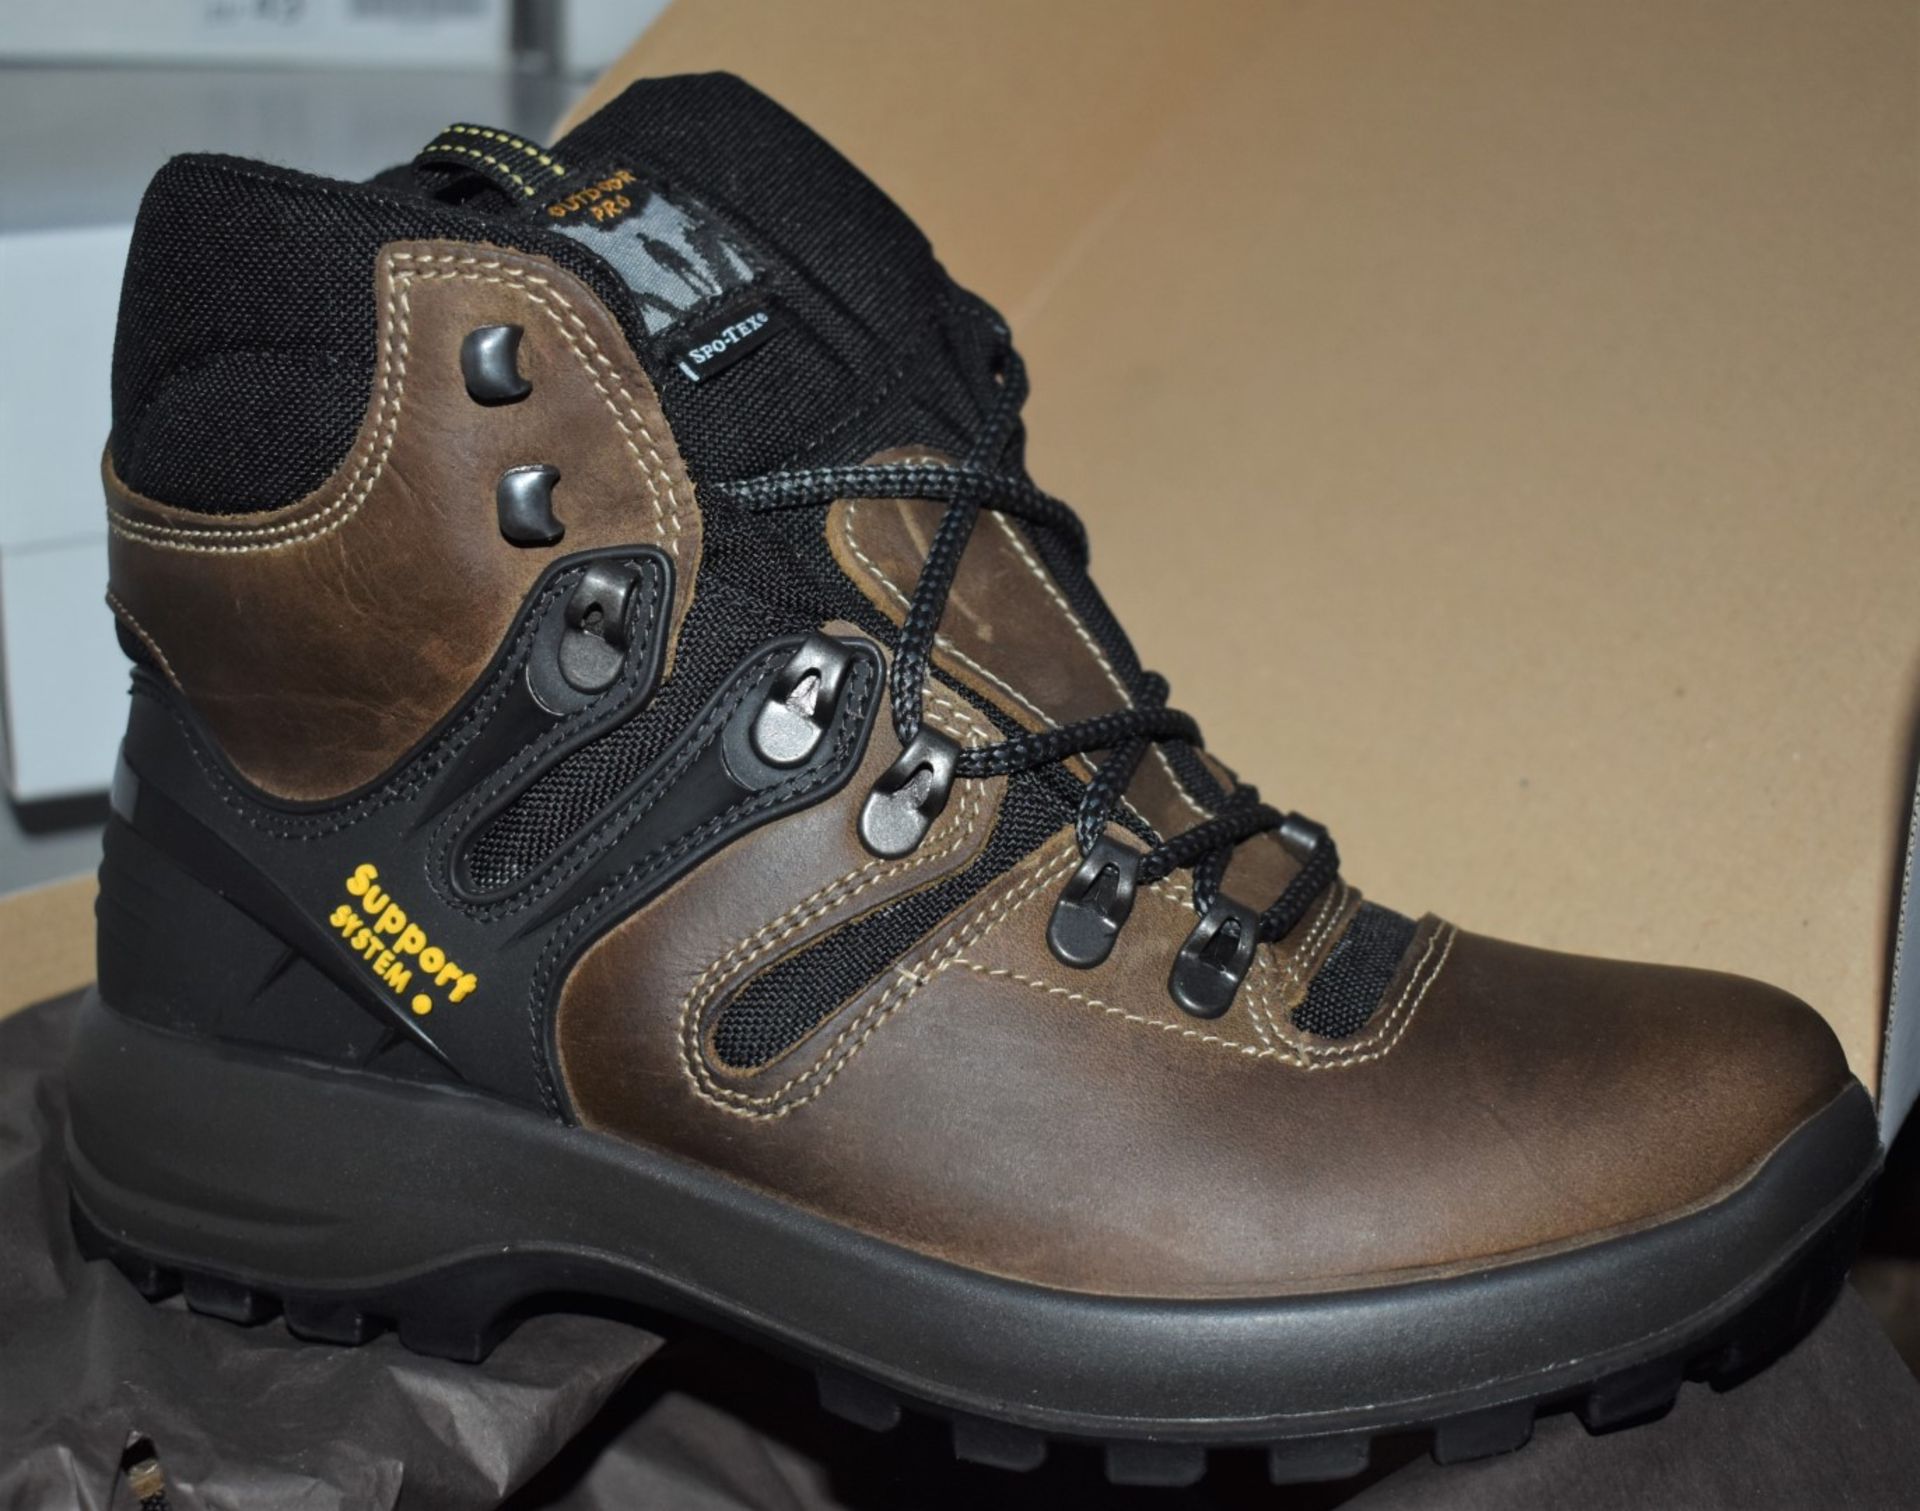 1 x Pair of Mens VIBRAM Walking Boots - Outdoor Pro Spo-Tex Trekking Boots With Support System - - Image 4 of 5